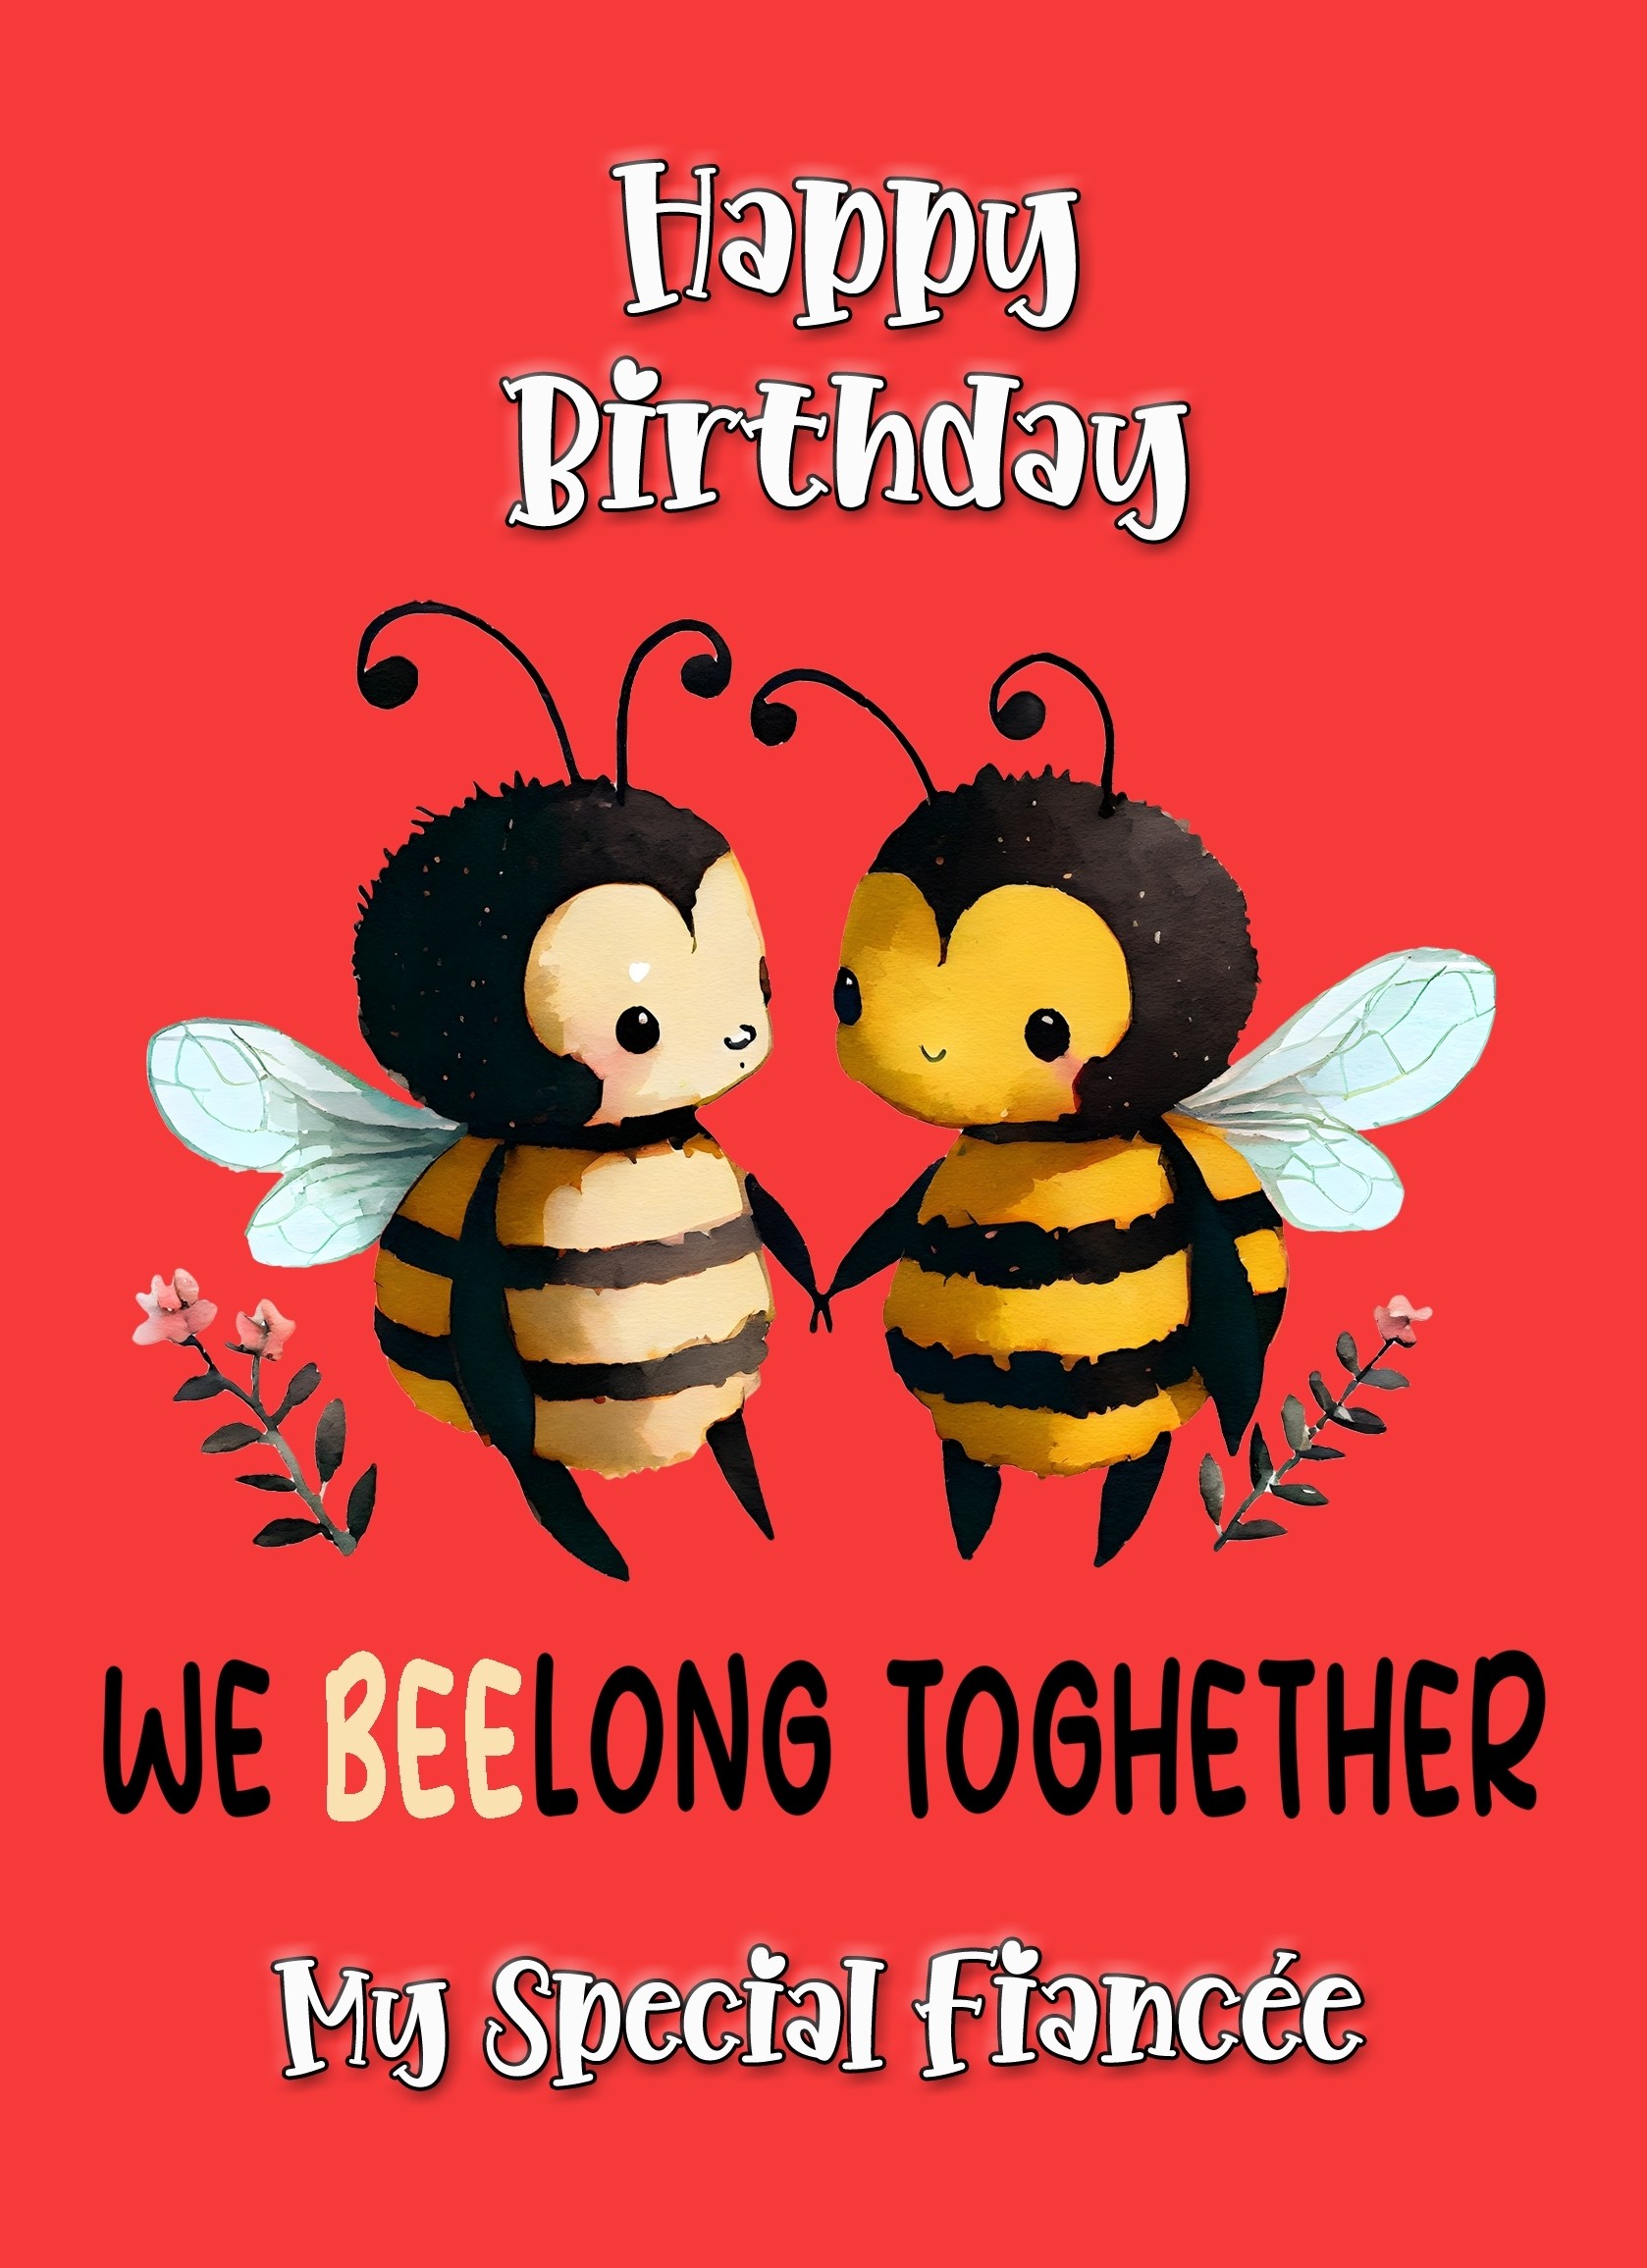 Funny Pun Romantic Birthday Card for Fiancee (Beelong Together)